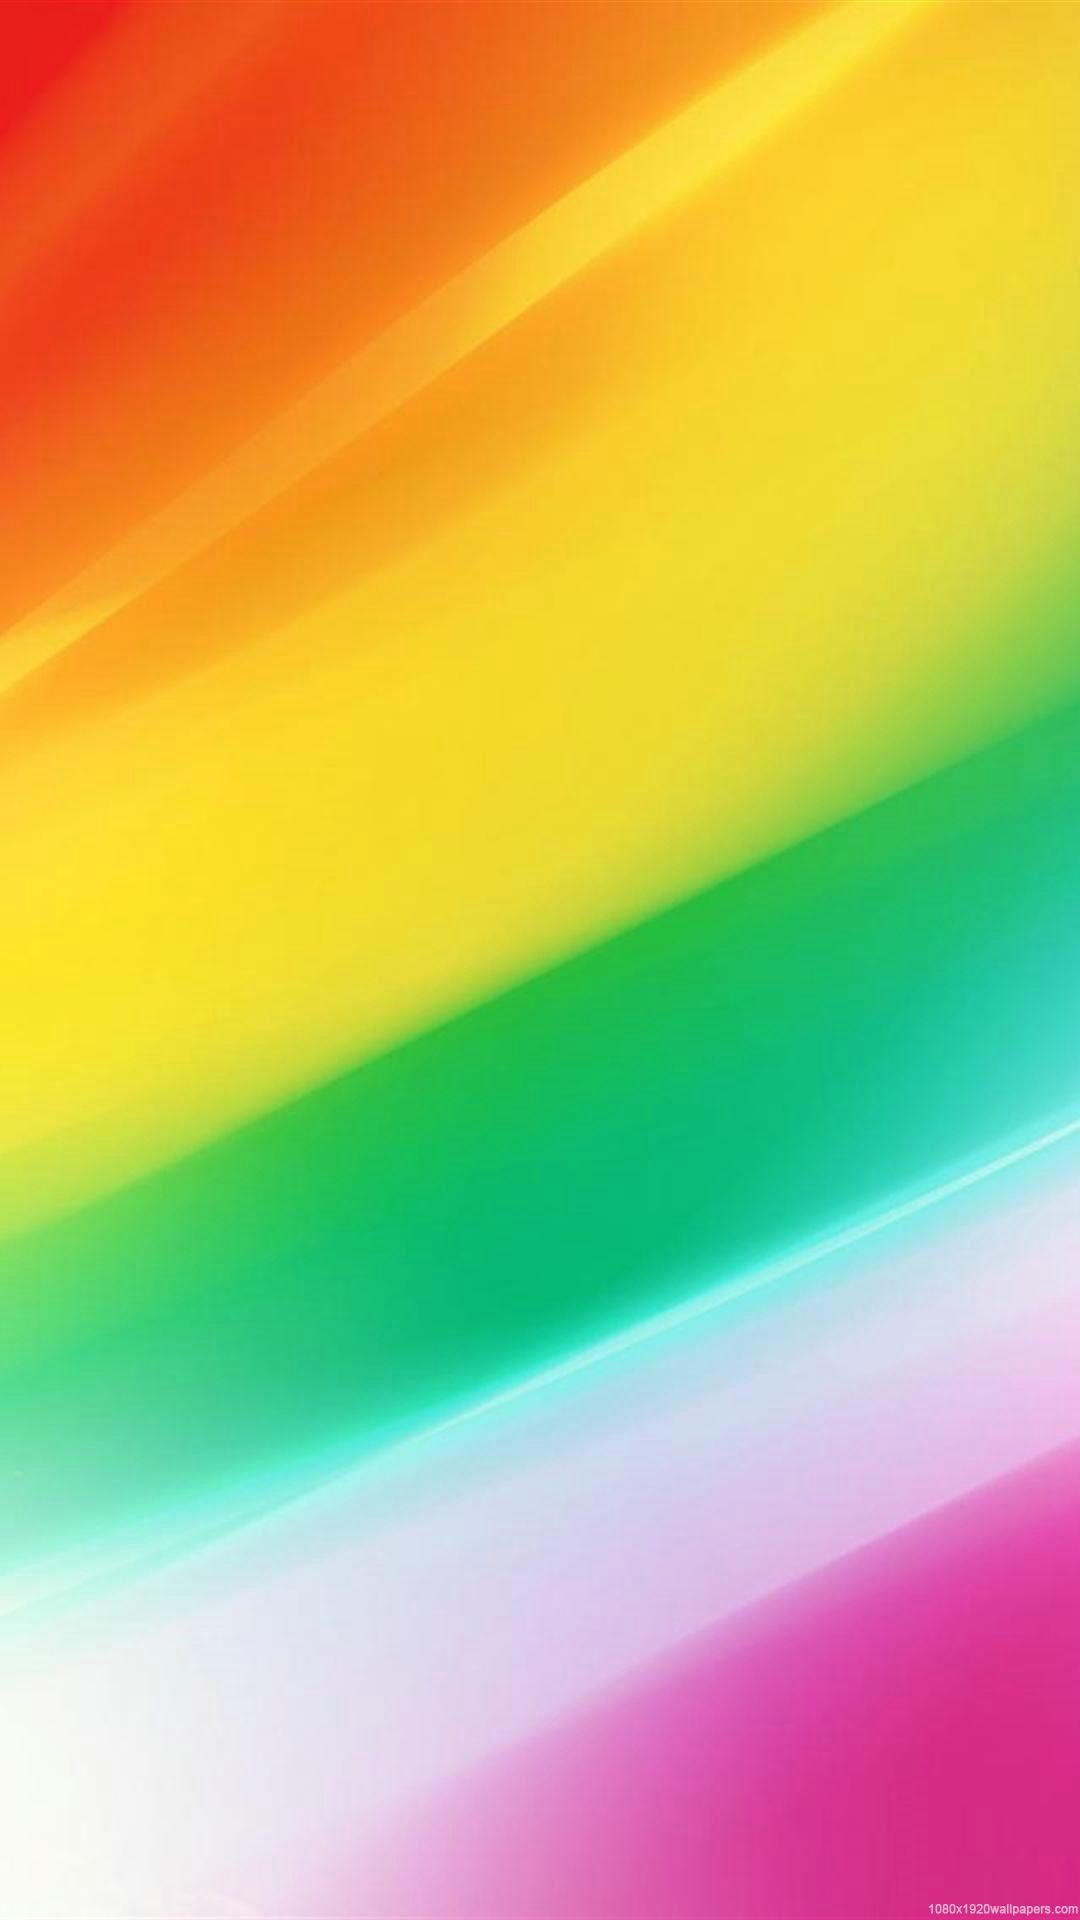 Android L Coloured Wallpaper. Android